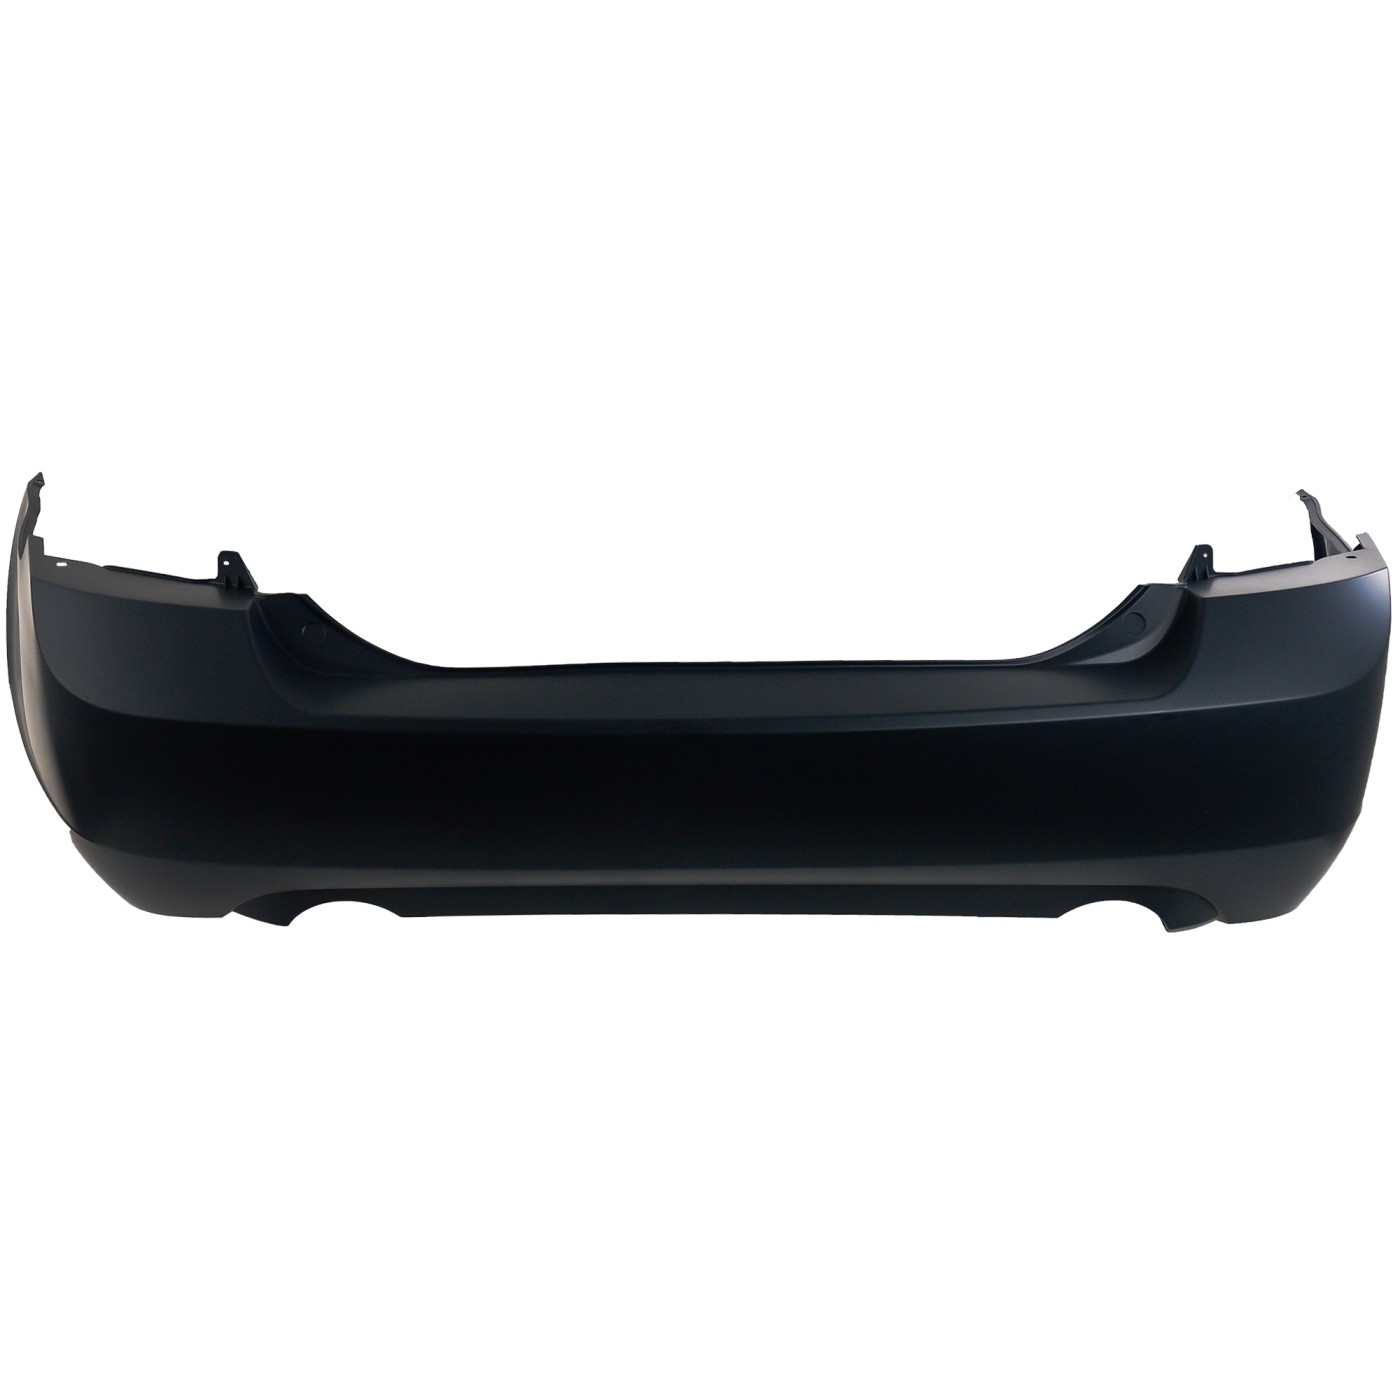 Rear Bumper Cover For 2006-2009 Ford Fusion w/ Dual Exhaust Holes